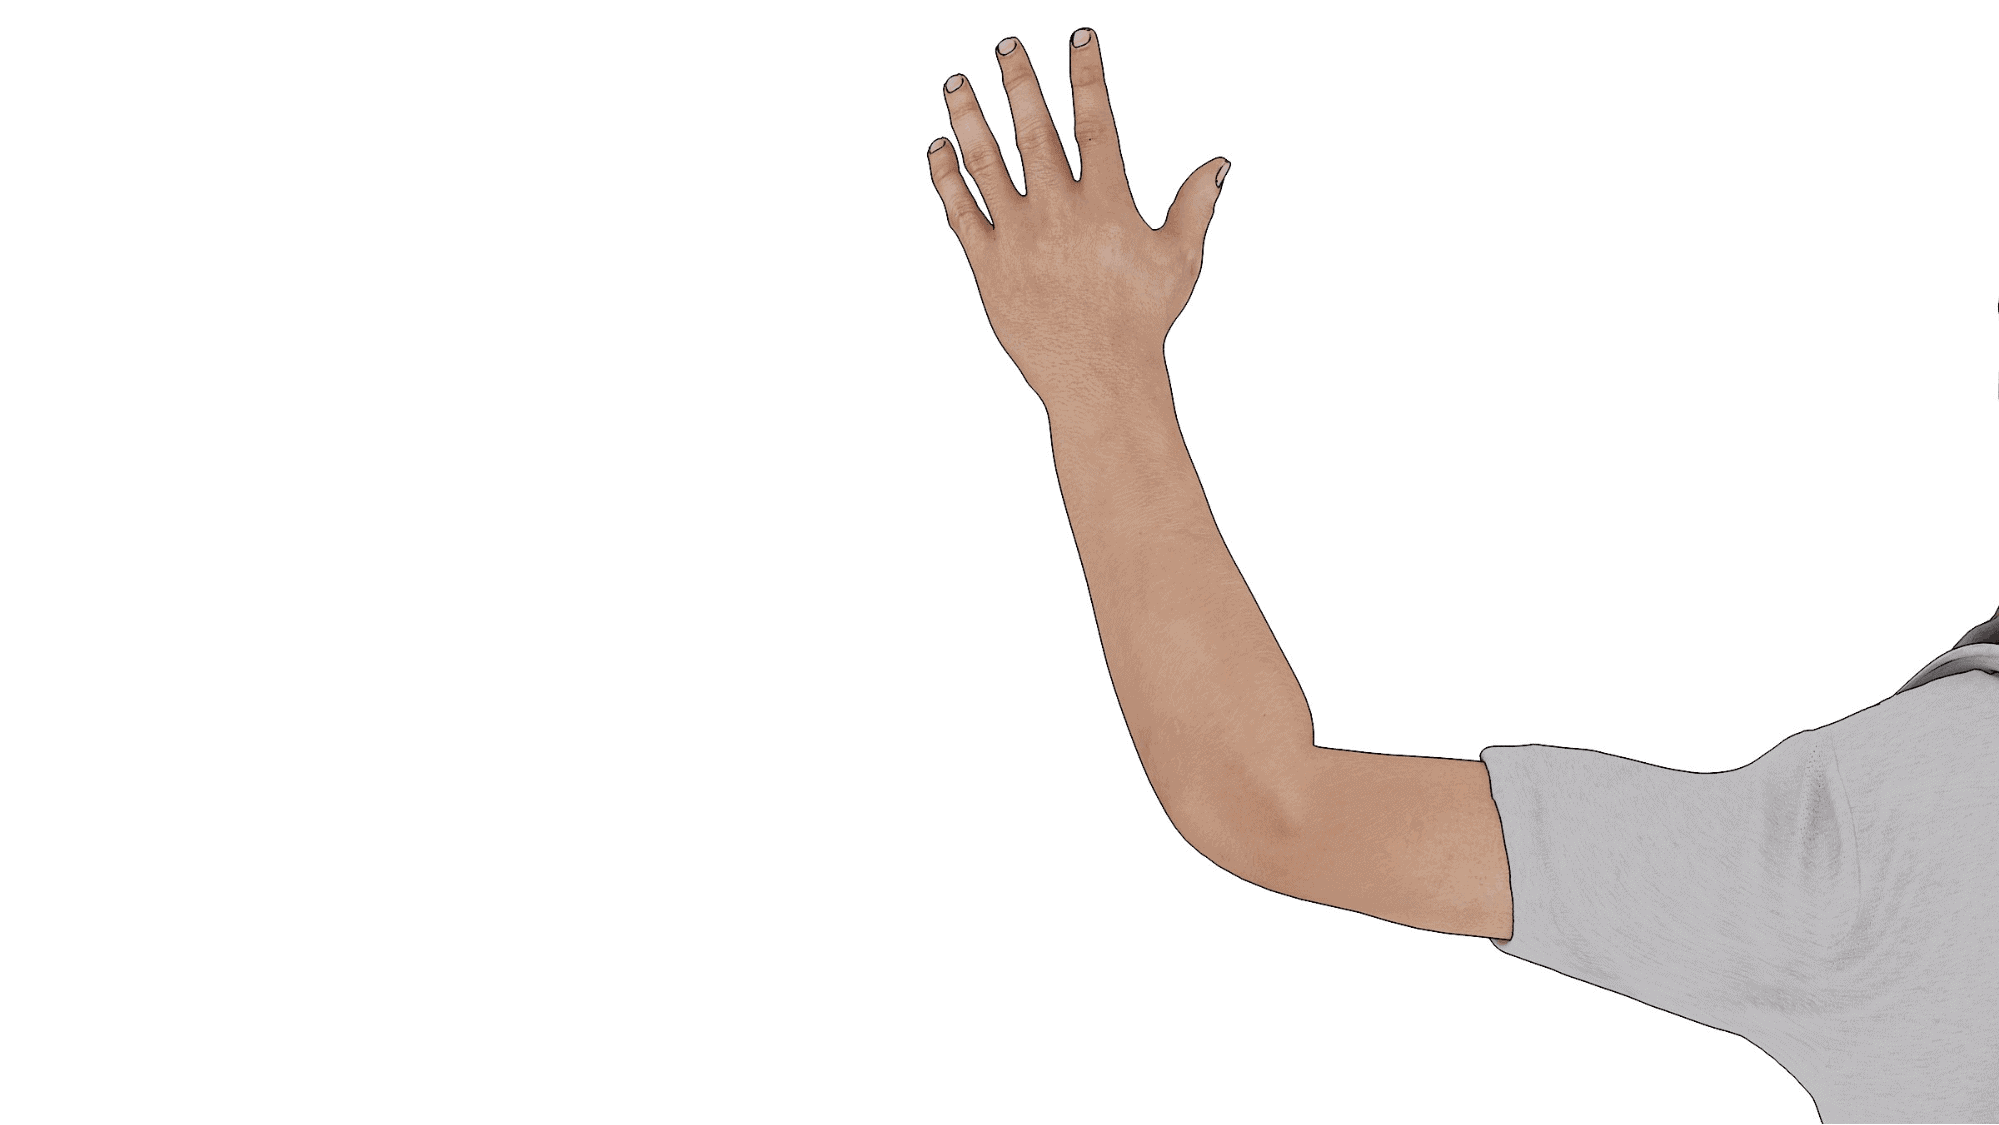 driver using hand signal to turn right